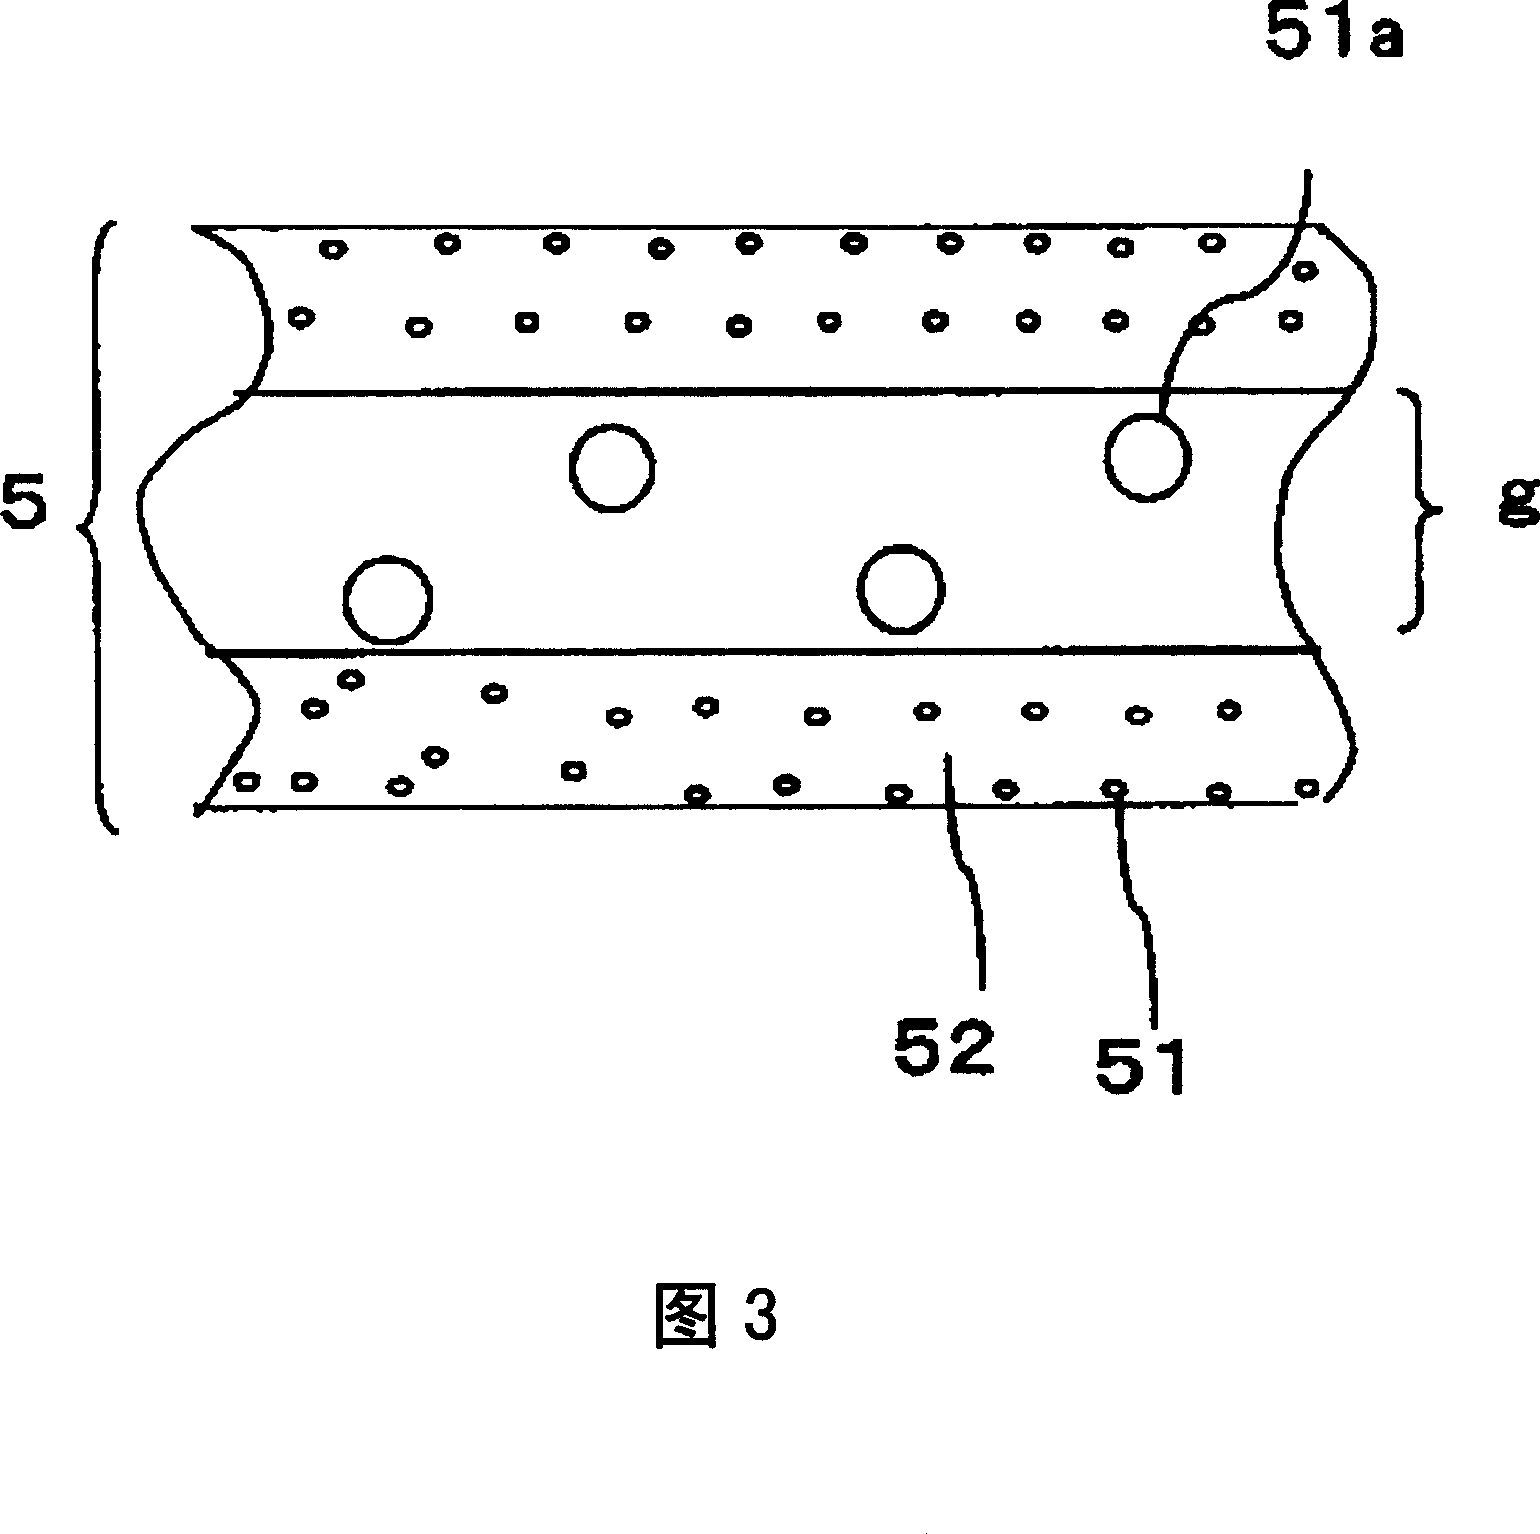 Heater and device for heating a wafer and method for fabricating the same